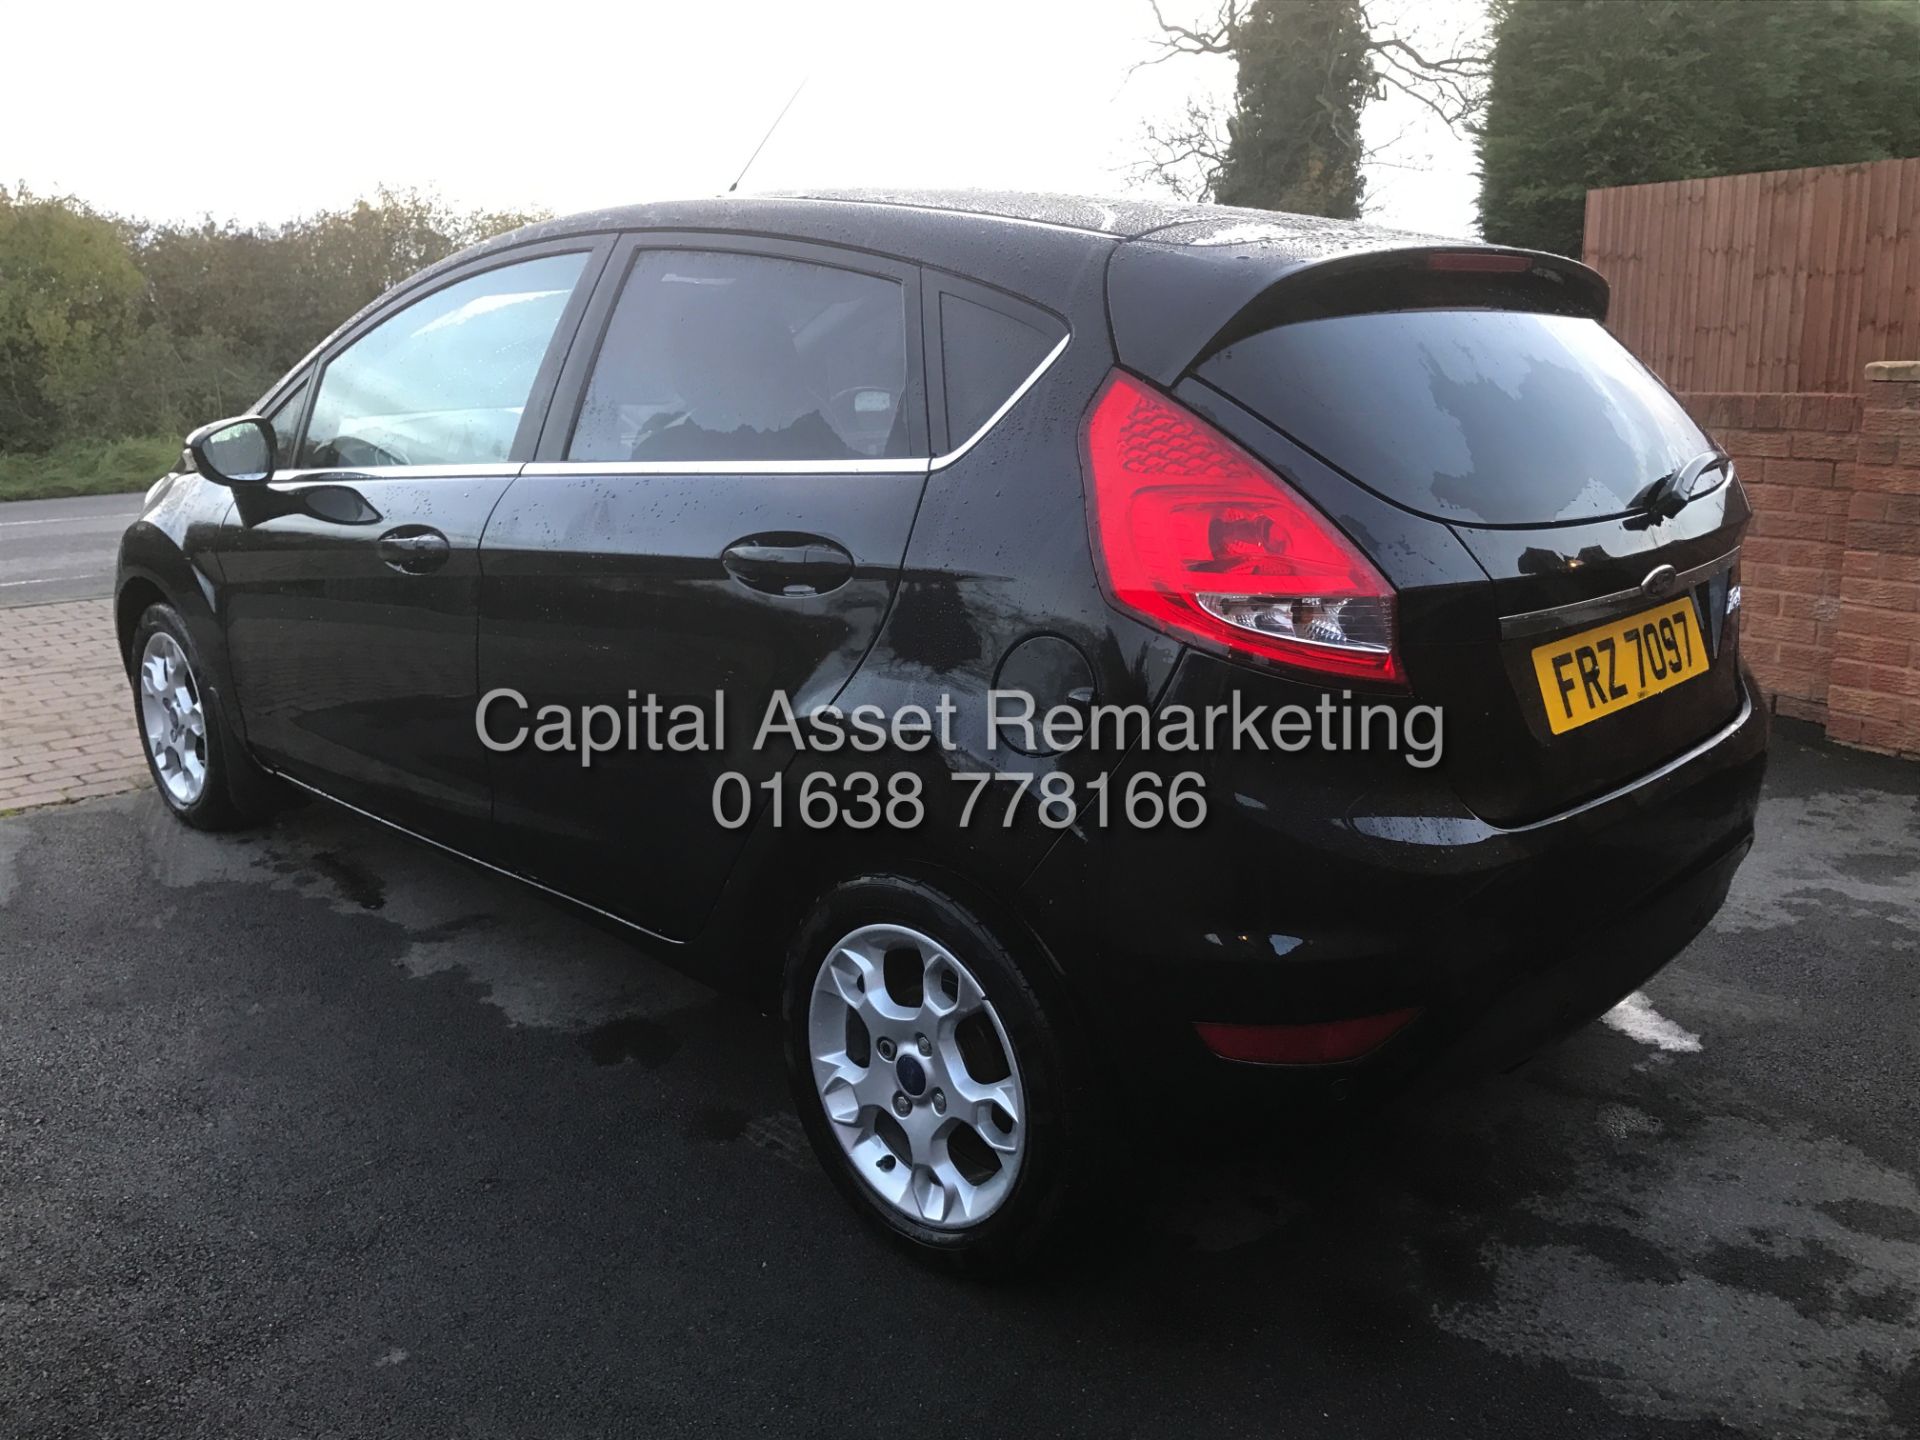 (ON SALE) FORD FIESTA 1.4TDCI "ZETEC" 5DOOR (2012 YEAR) AIR CON-ELEC PACK- RED/BLACK INTERIOR - Image 5 of 22